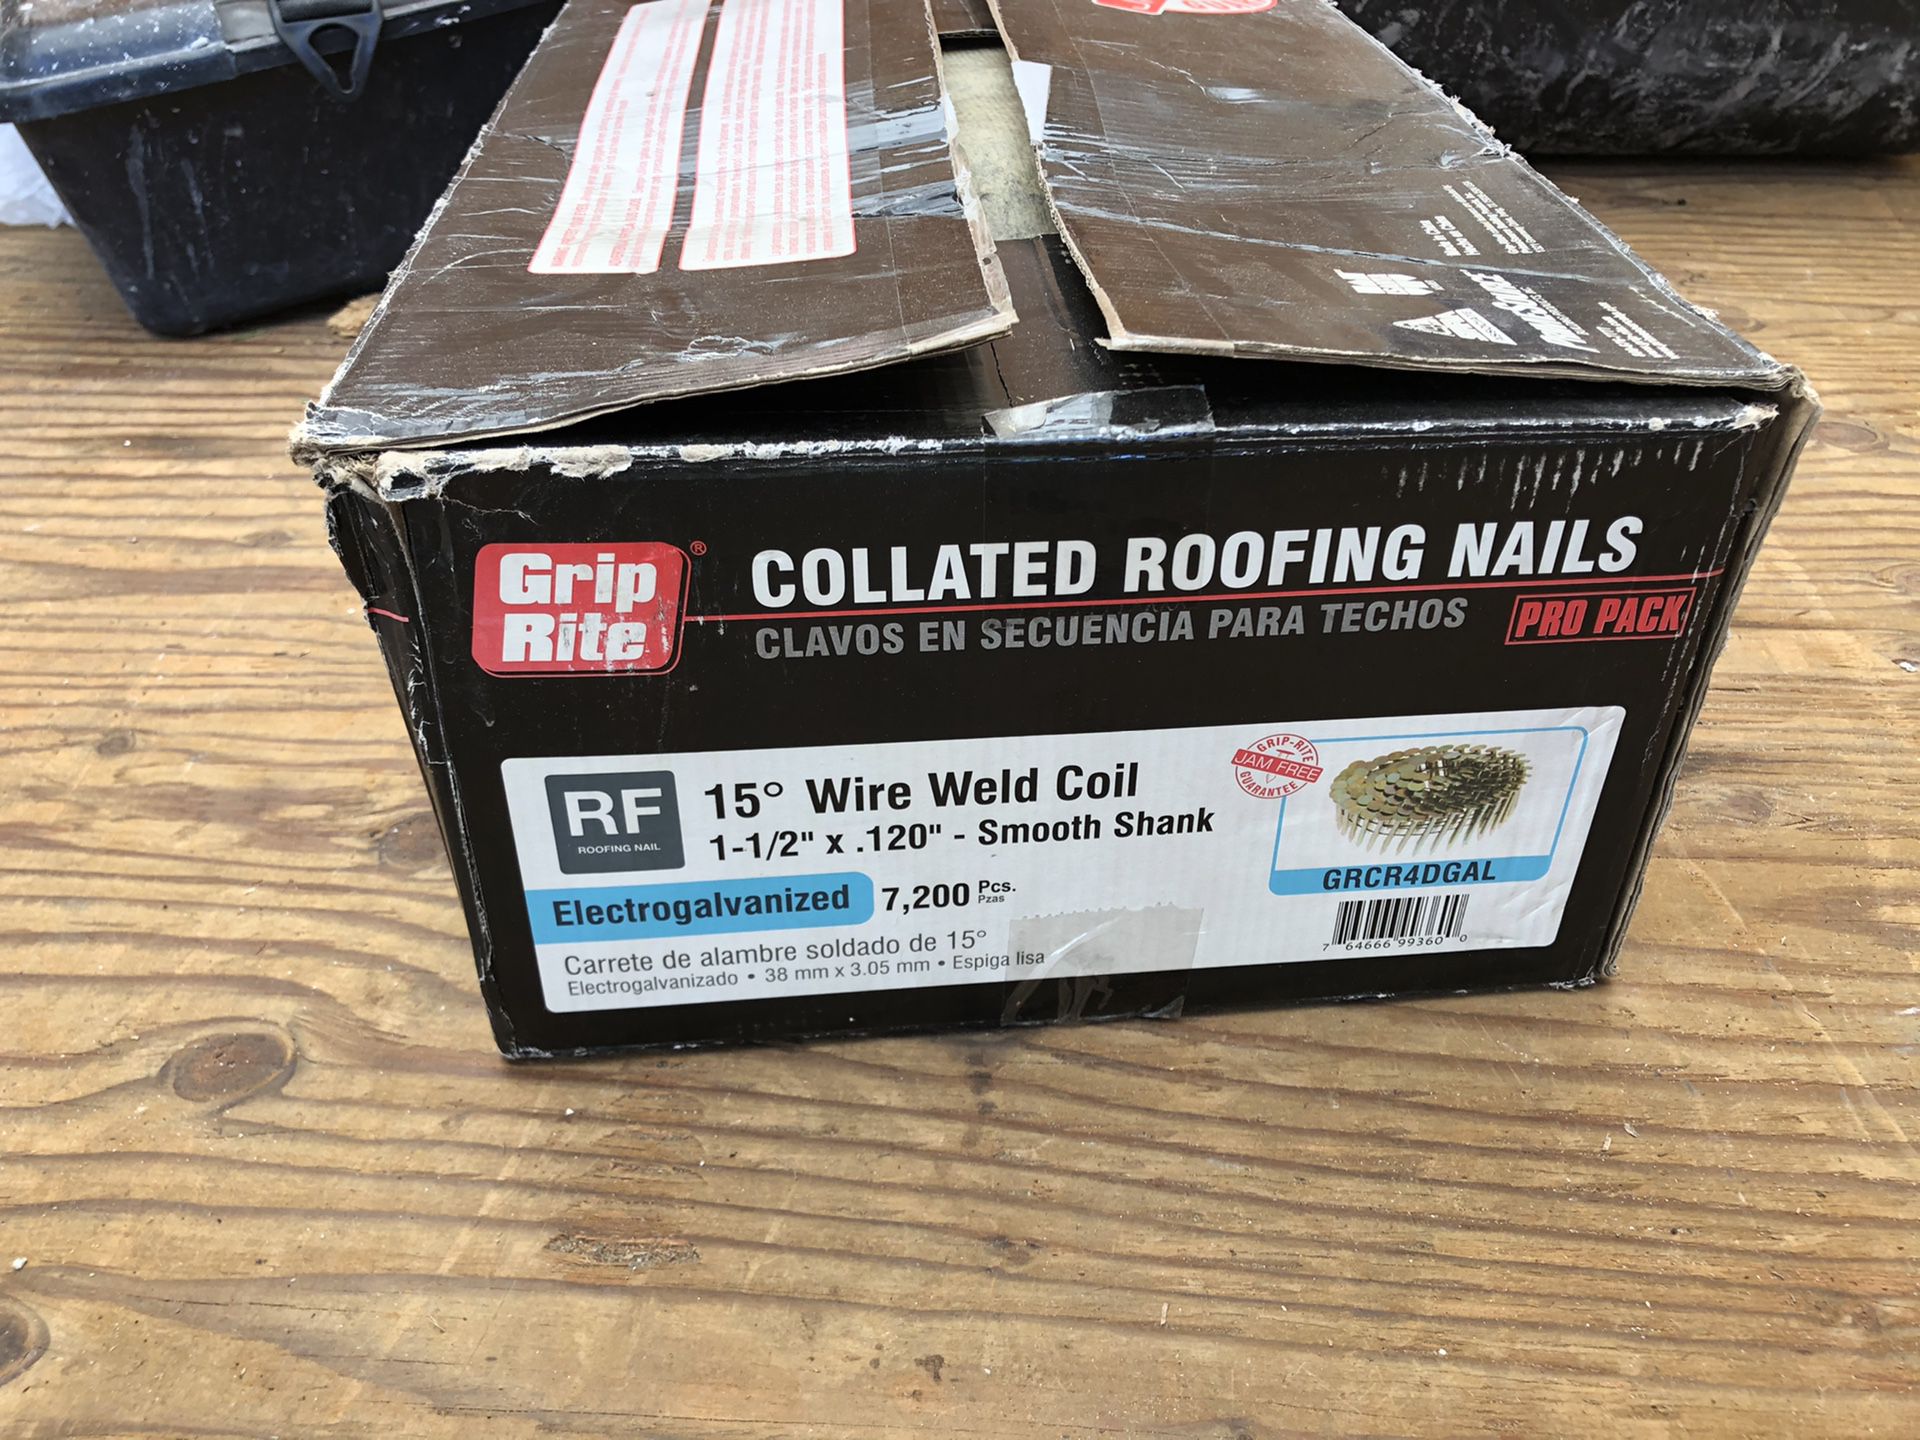 Collated roofing nails